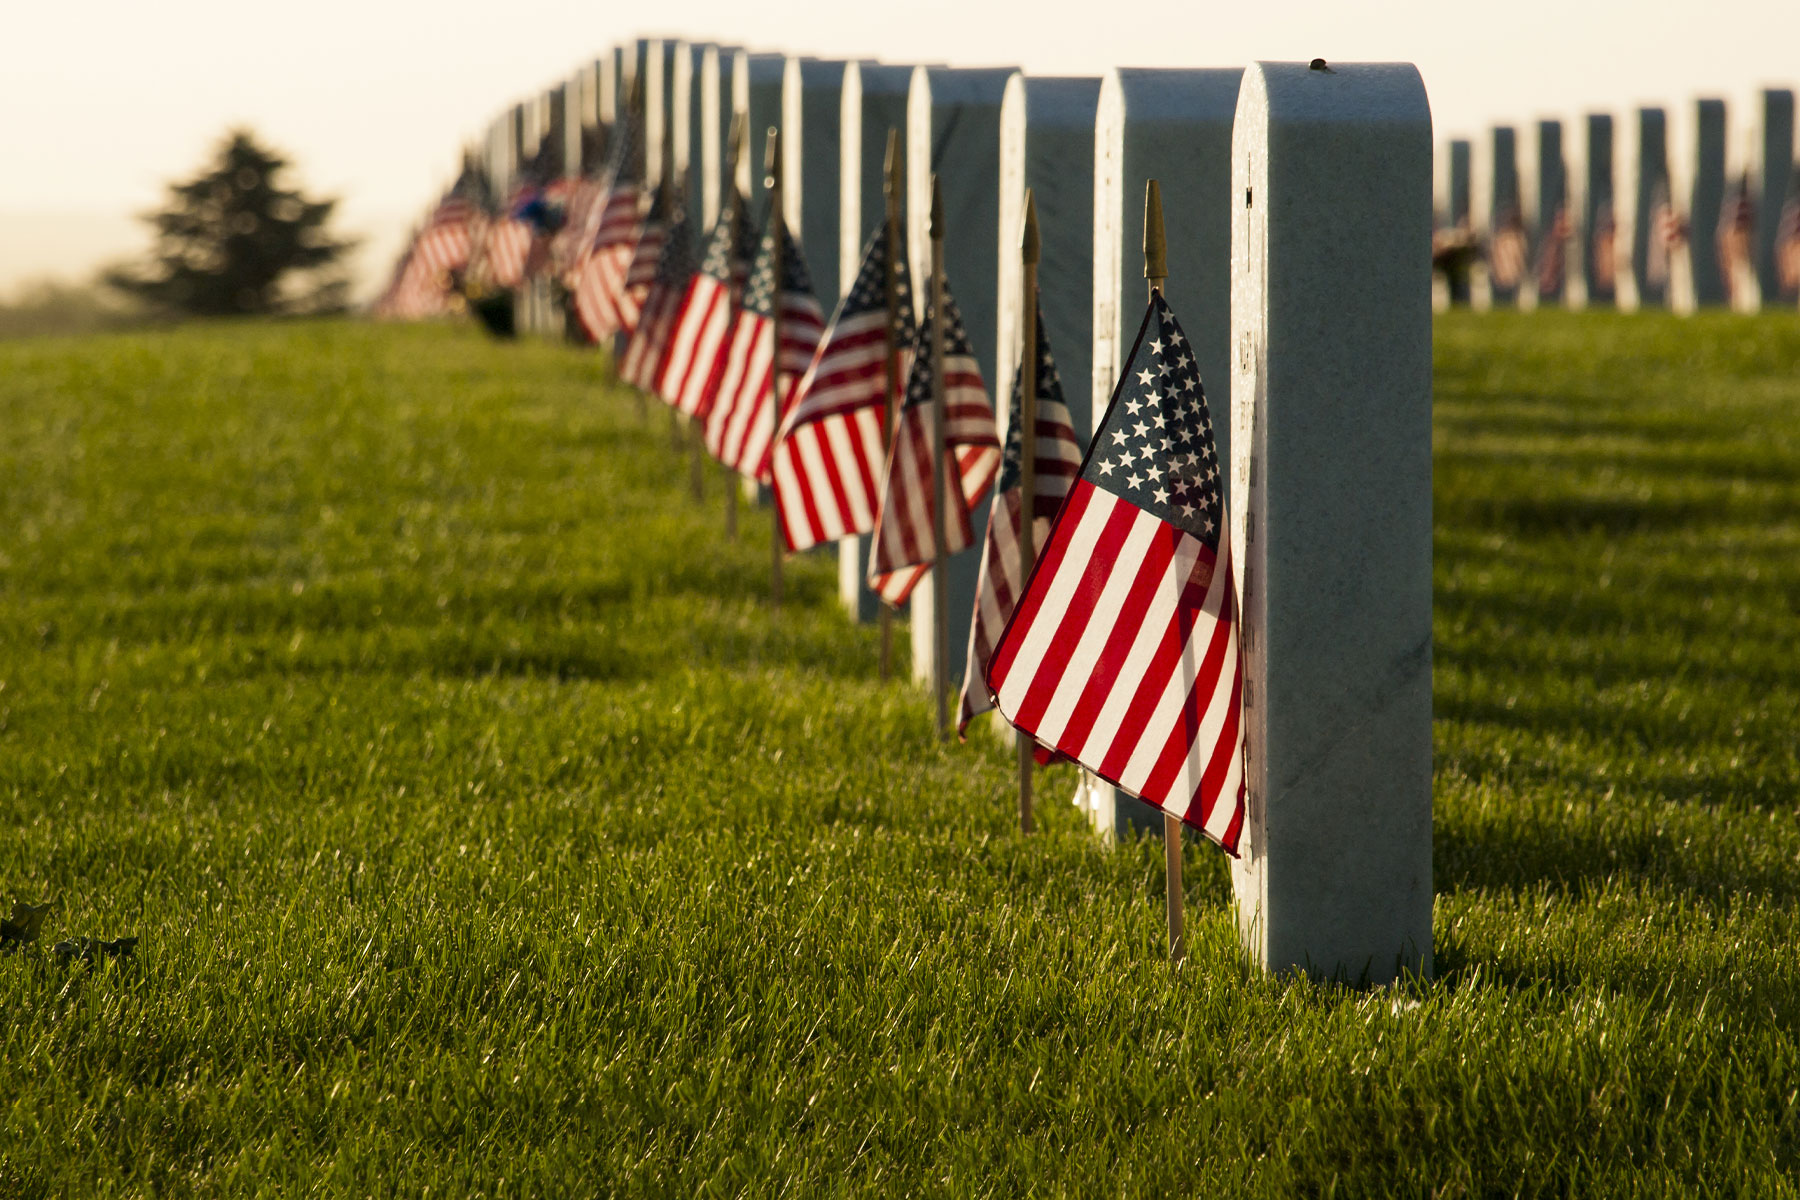 row of military gravestones with flags on each marker